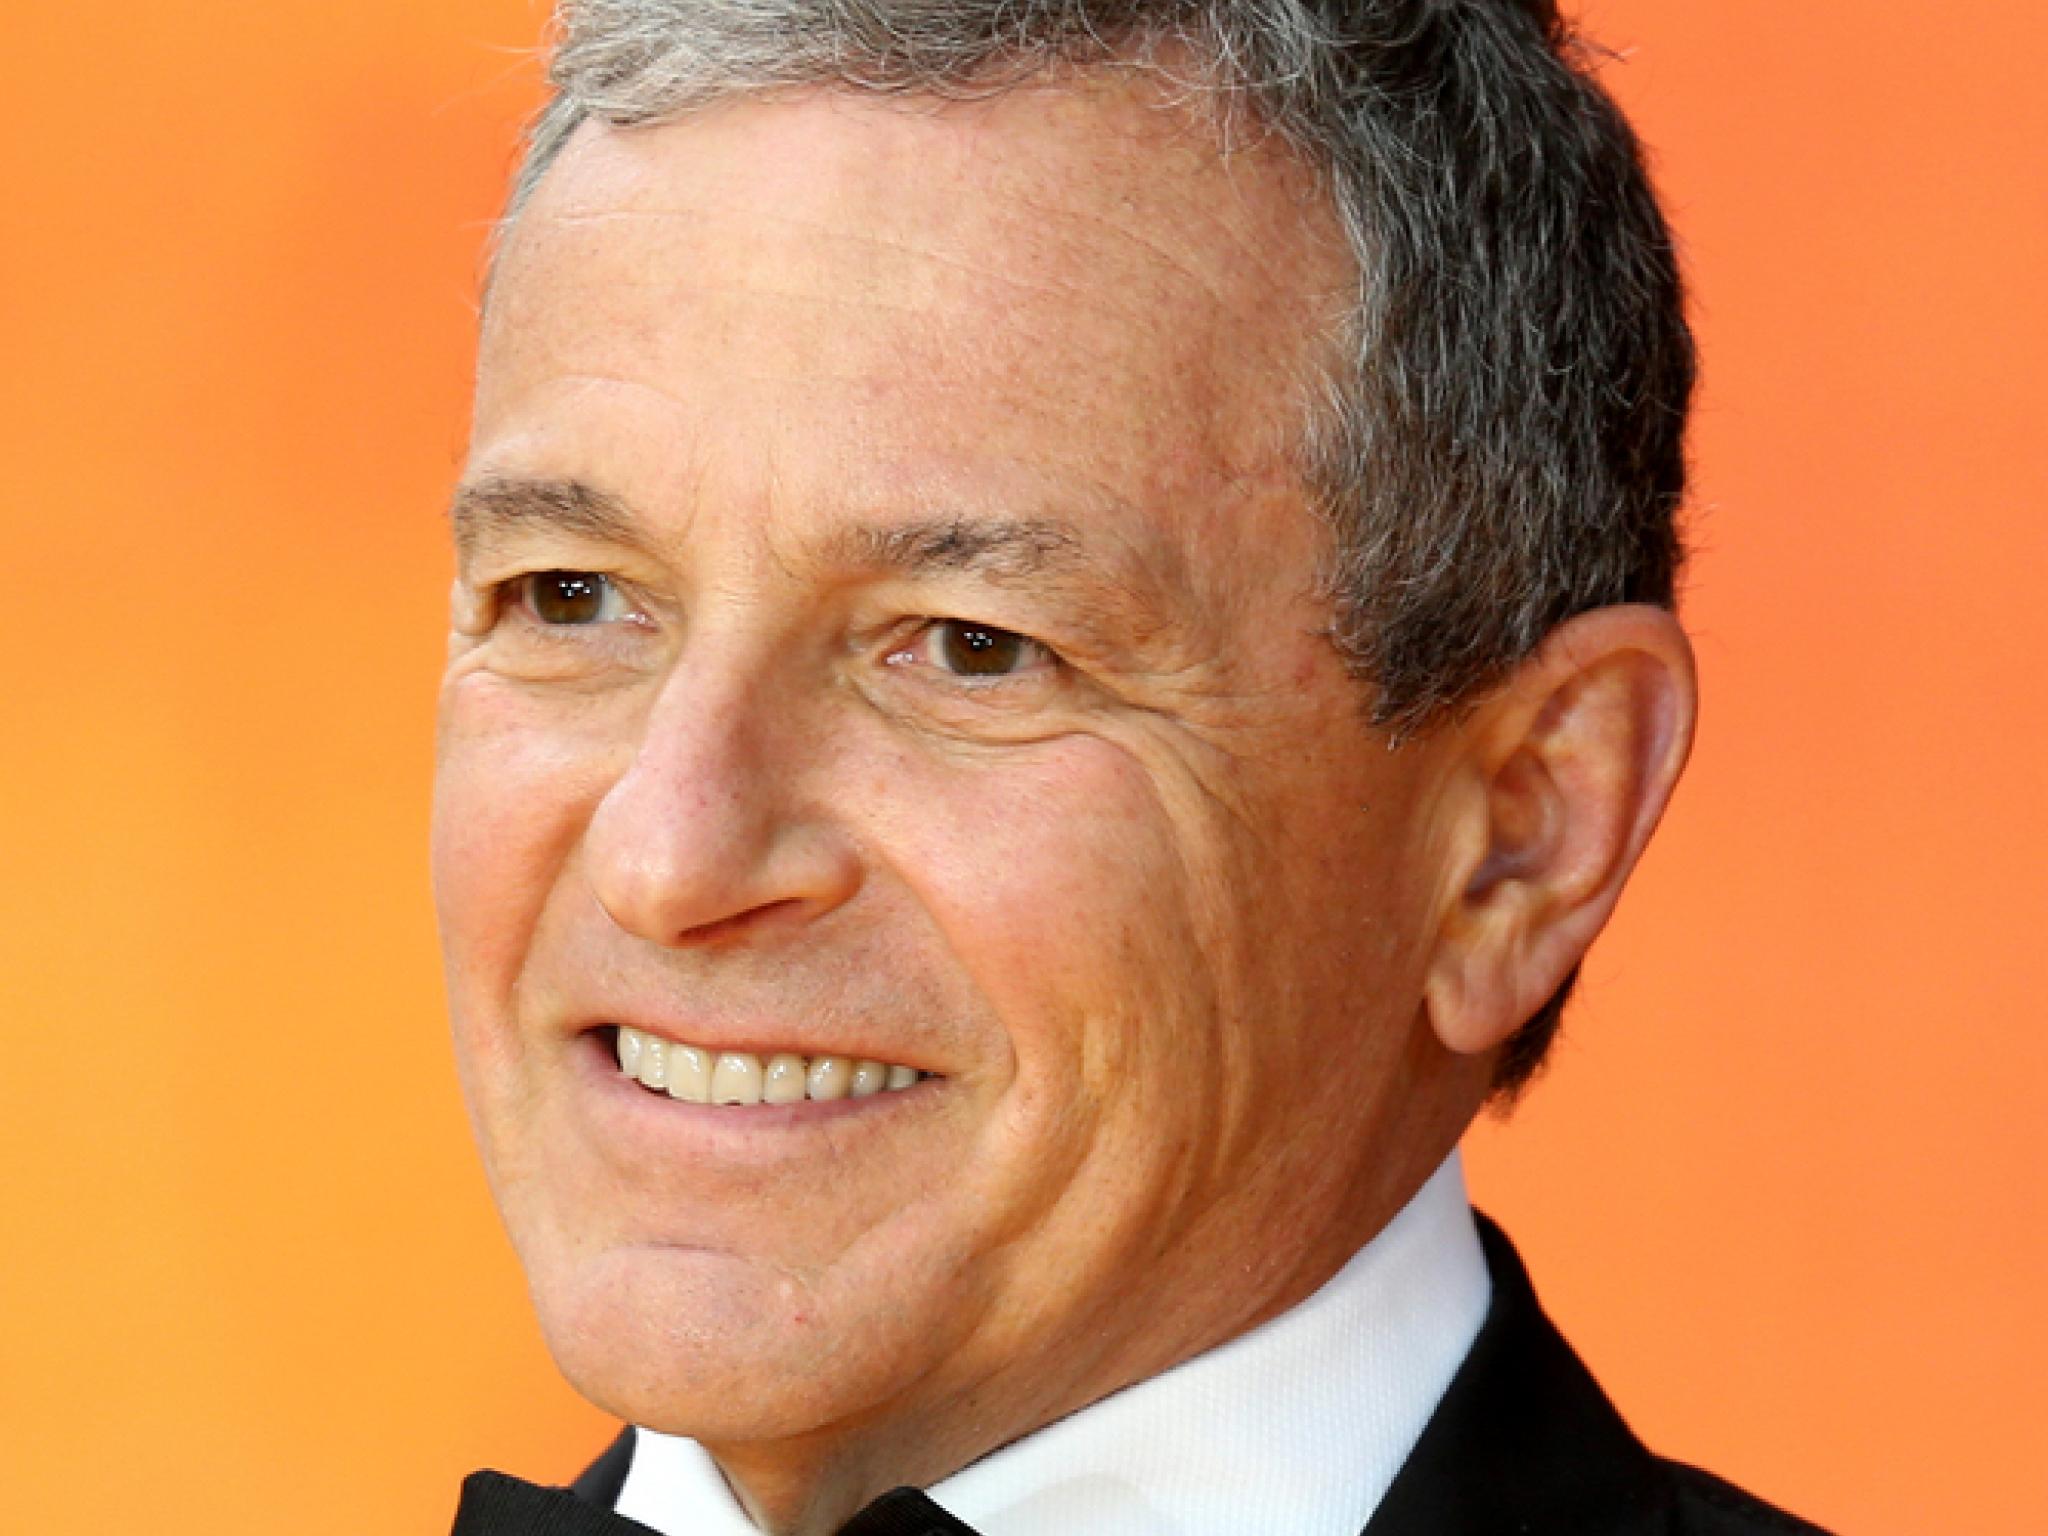  disney-ceo-bob-iger-remains-tight-lipped-on-successor-but-assures-smooth-transition 